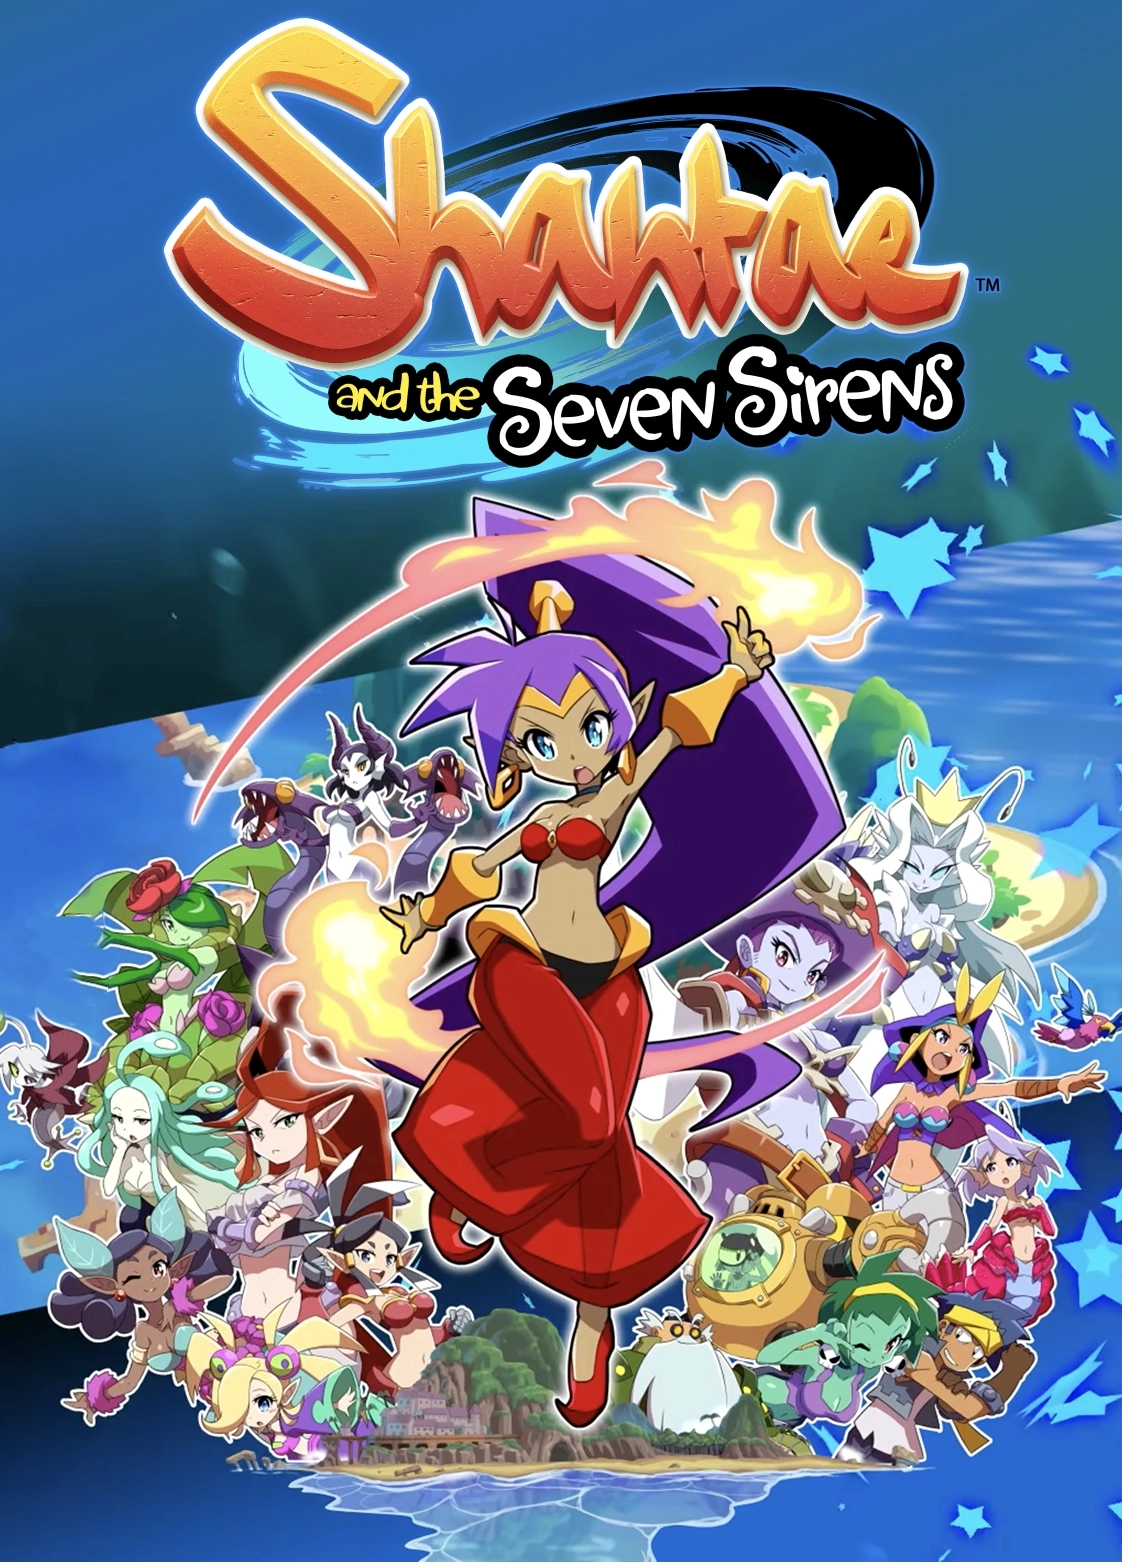 shantae switch release date